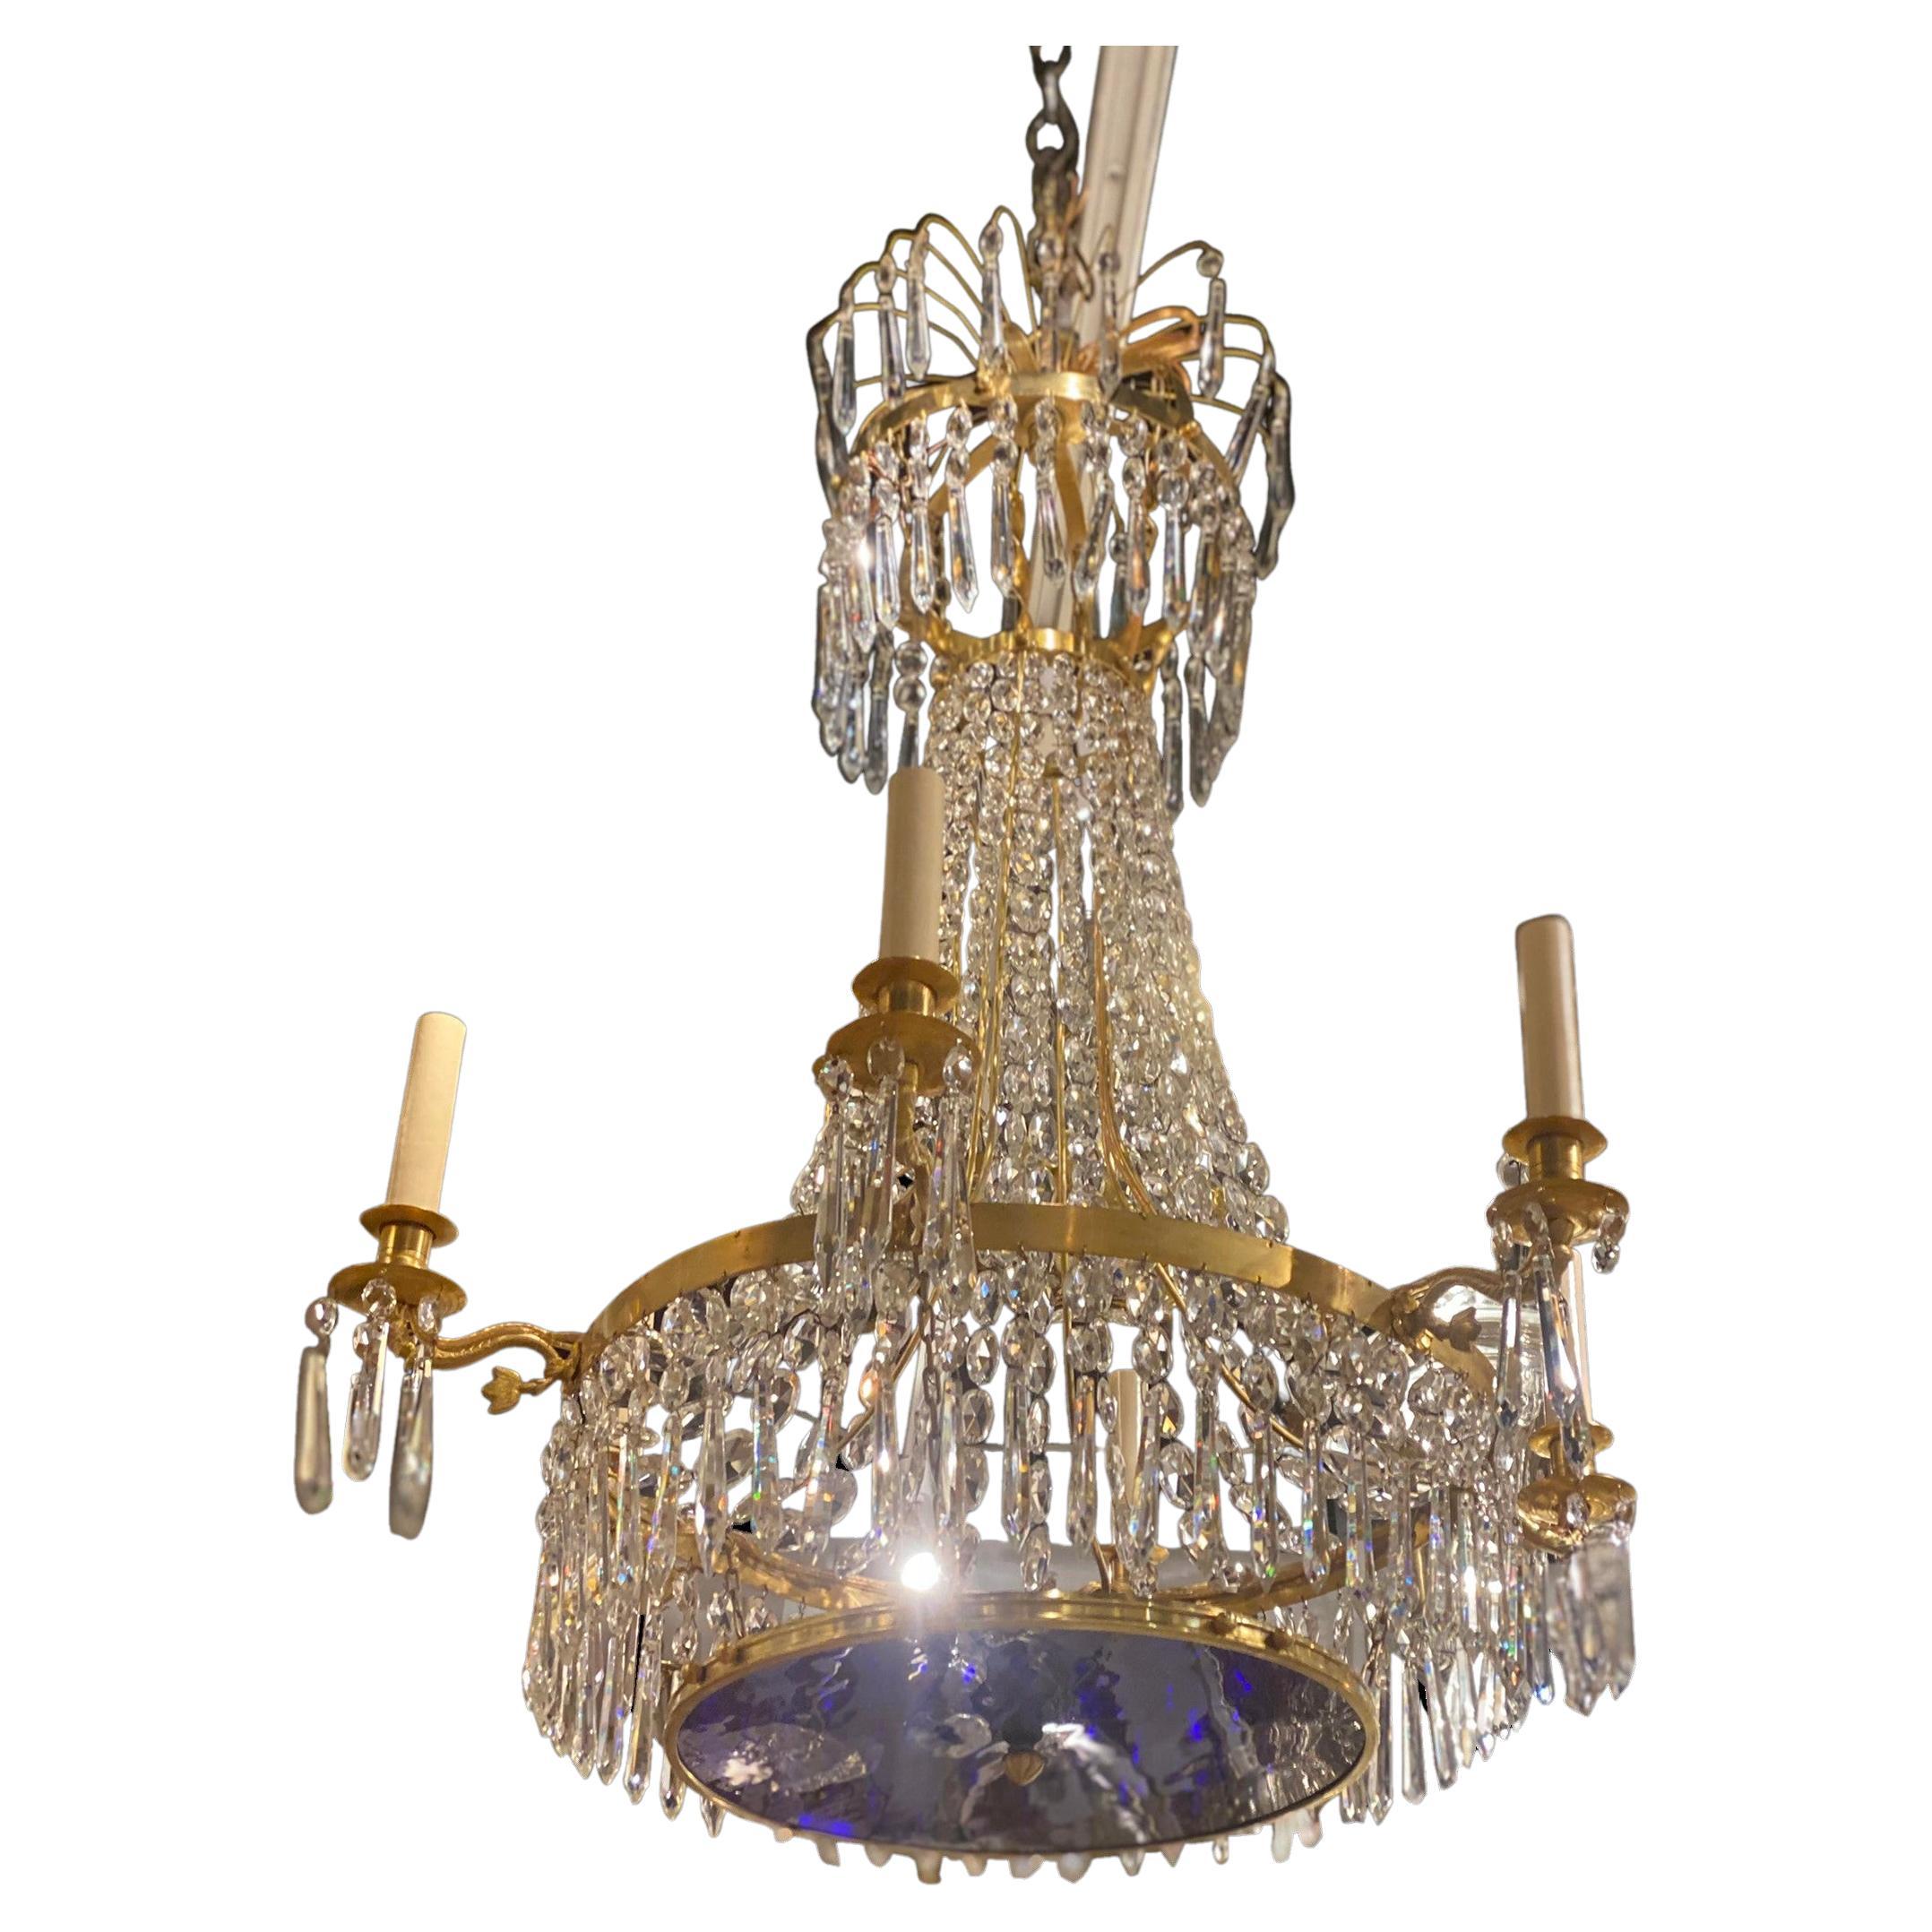 1900's Swedish Empire 6 Lights Chandelier with Cobalt Blue Glass For Sale